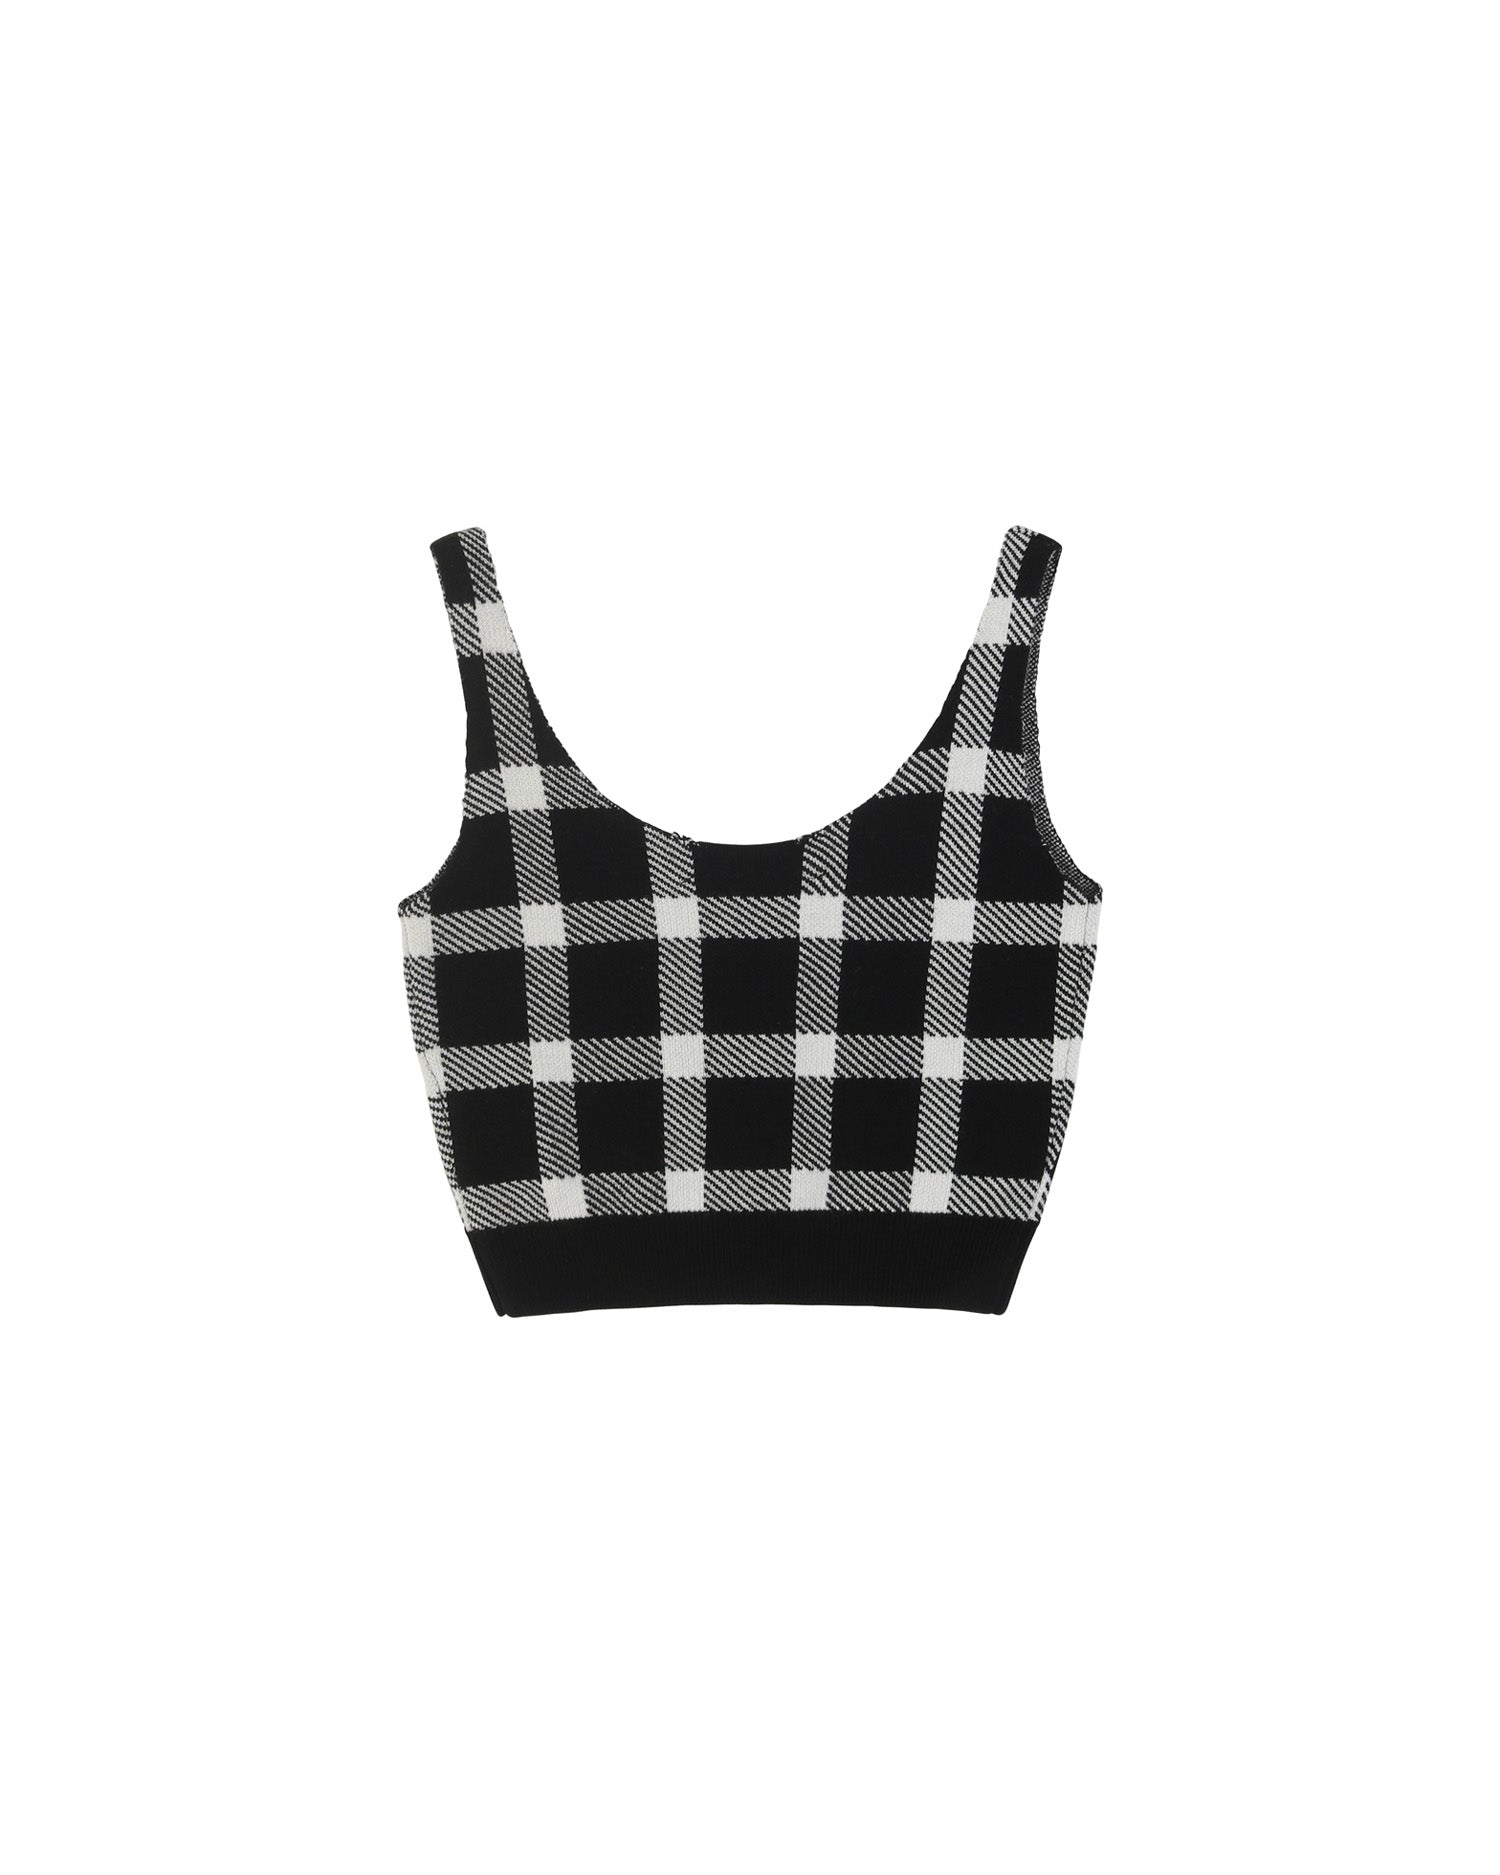 Checked crop top